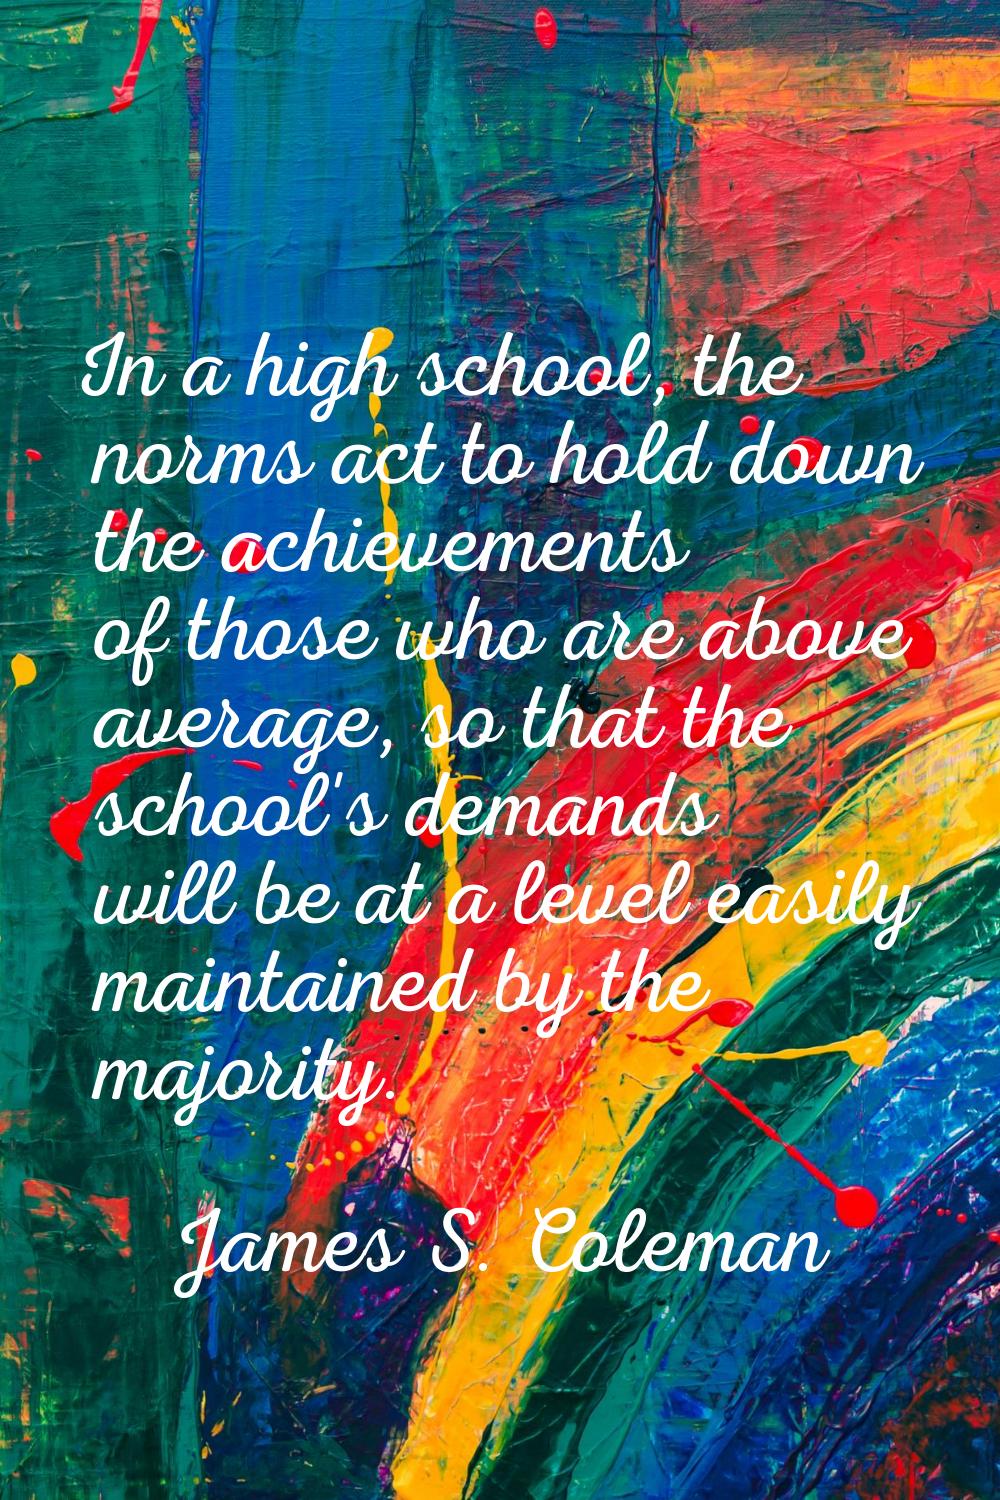 In a high school, the norms act to hold down the achievements of those who are above average, so th